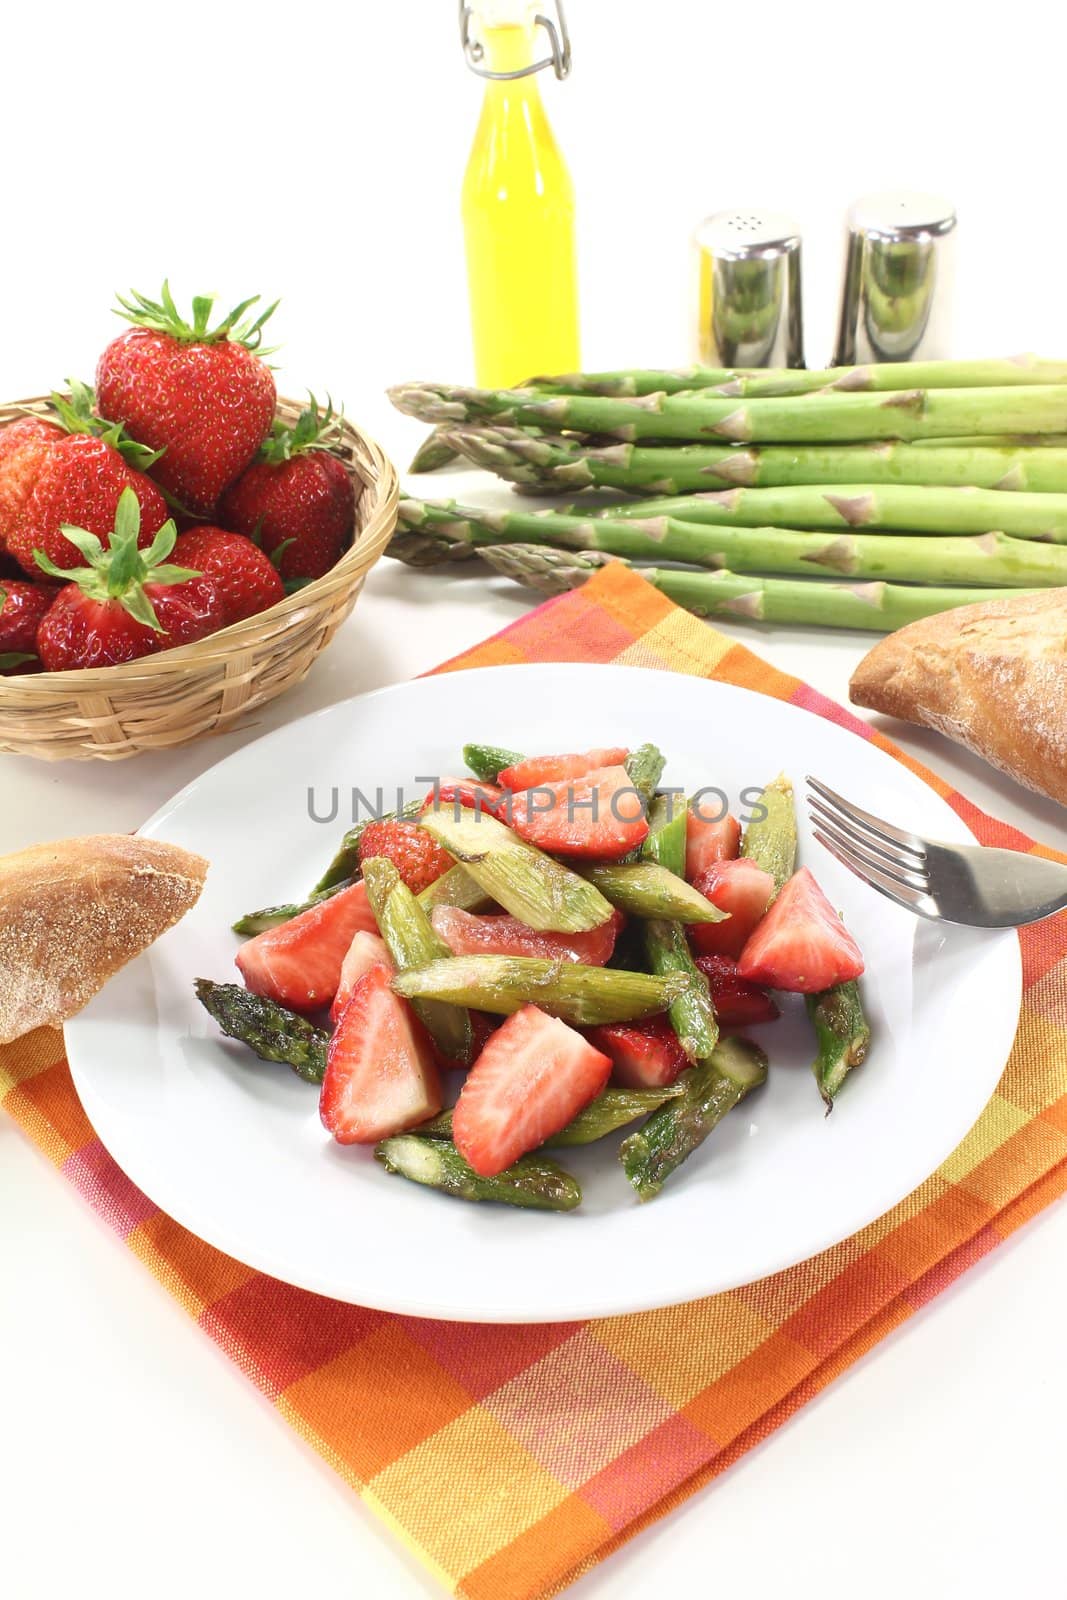 green Asparagus salad with red strawberries and bread on a light background